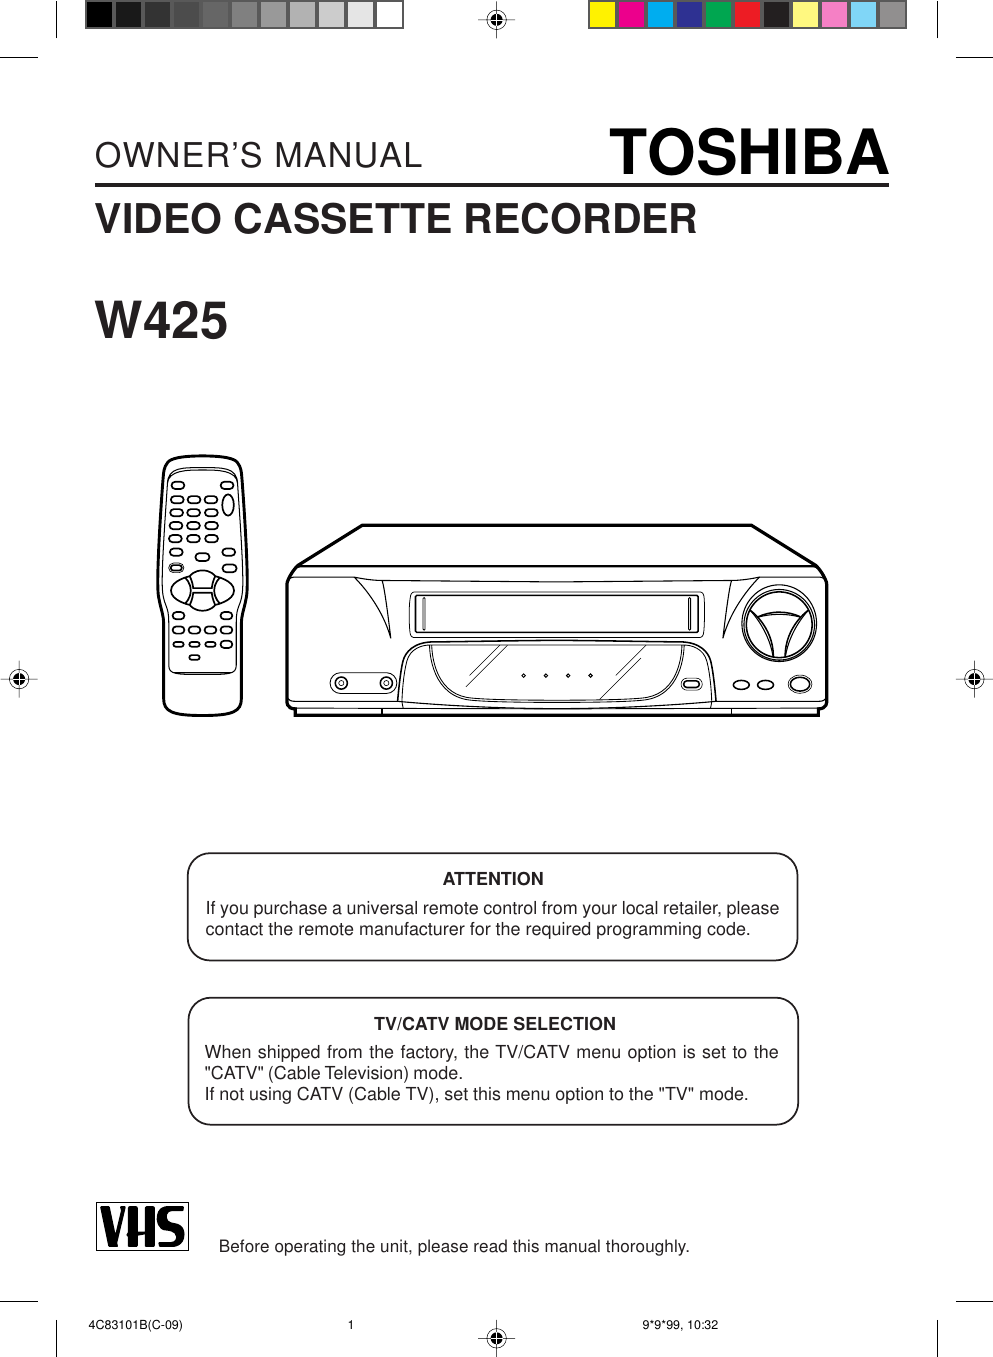 VIDEO CASSETTE RECORDEROWNER’S MANUALBefore operating the unit, please read this manual thoroughly.W425TV/CATV MODE SELECTIONWhen shipped from the factory, the TV/CATV menu option is set to the&quot;CATV&quot; (Cable Television) mode.If not using CATV (Cable TV), set this menu option to the &quot;TV&quot; mode.ATTENTIONIf you purchase a universal remote control from your local retailer, pleasecontact the remote manufacturer for the required programming code. 4C83101B(C-09) 9*9*99, 10:321TOSHIBA